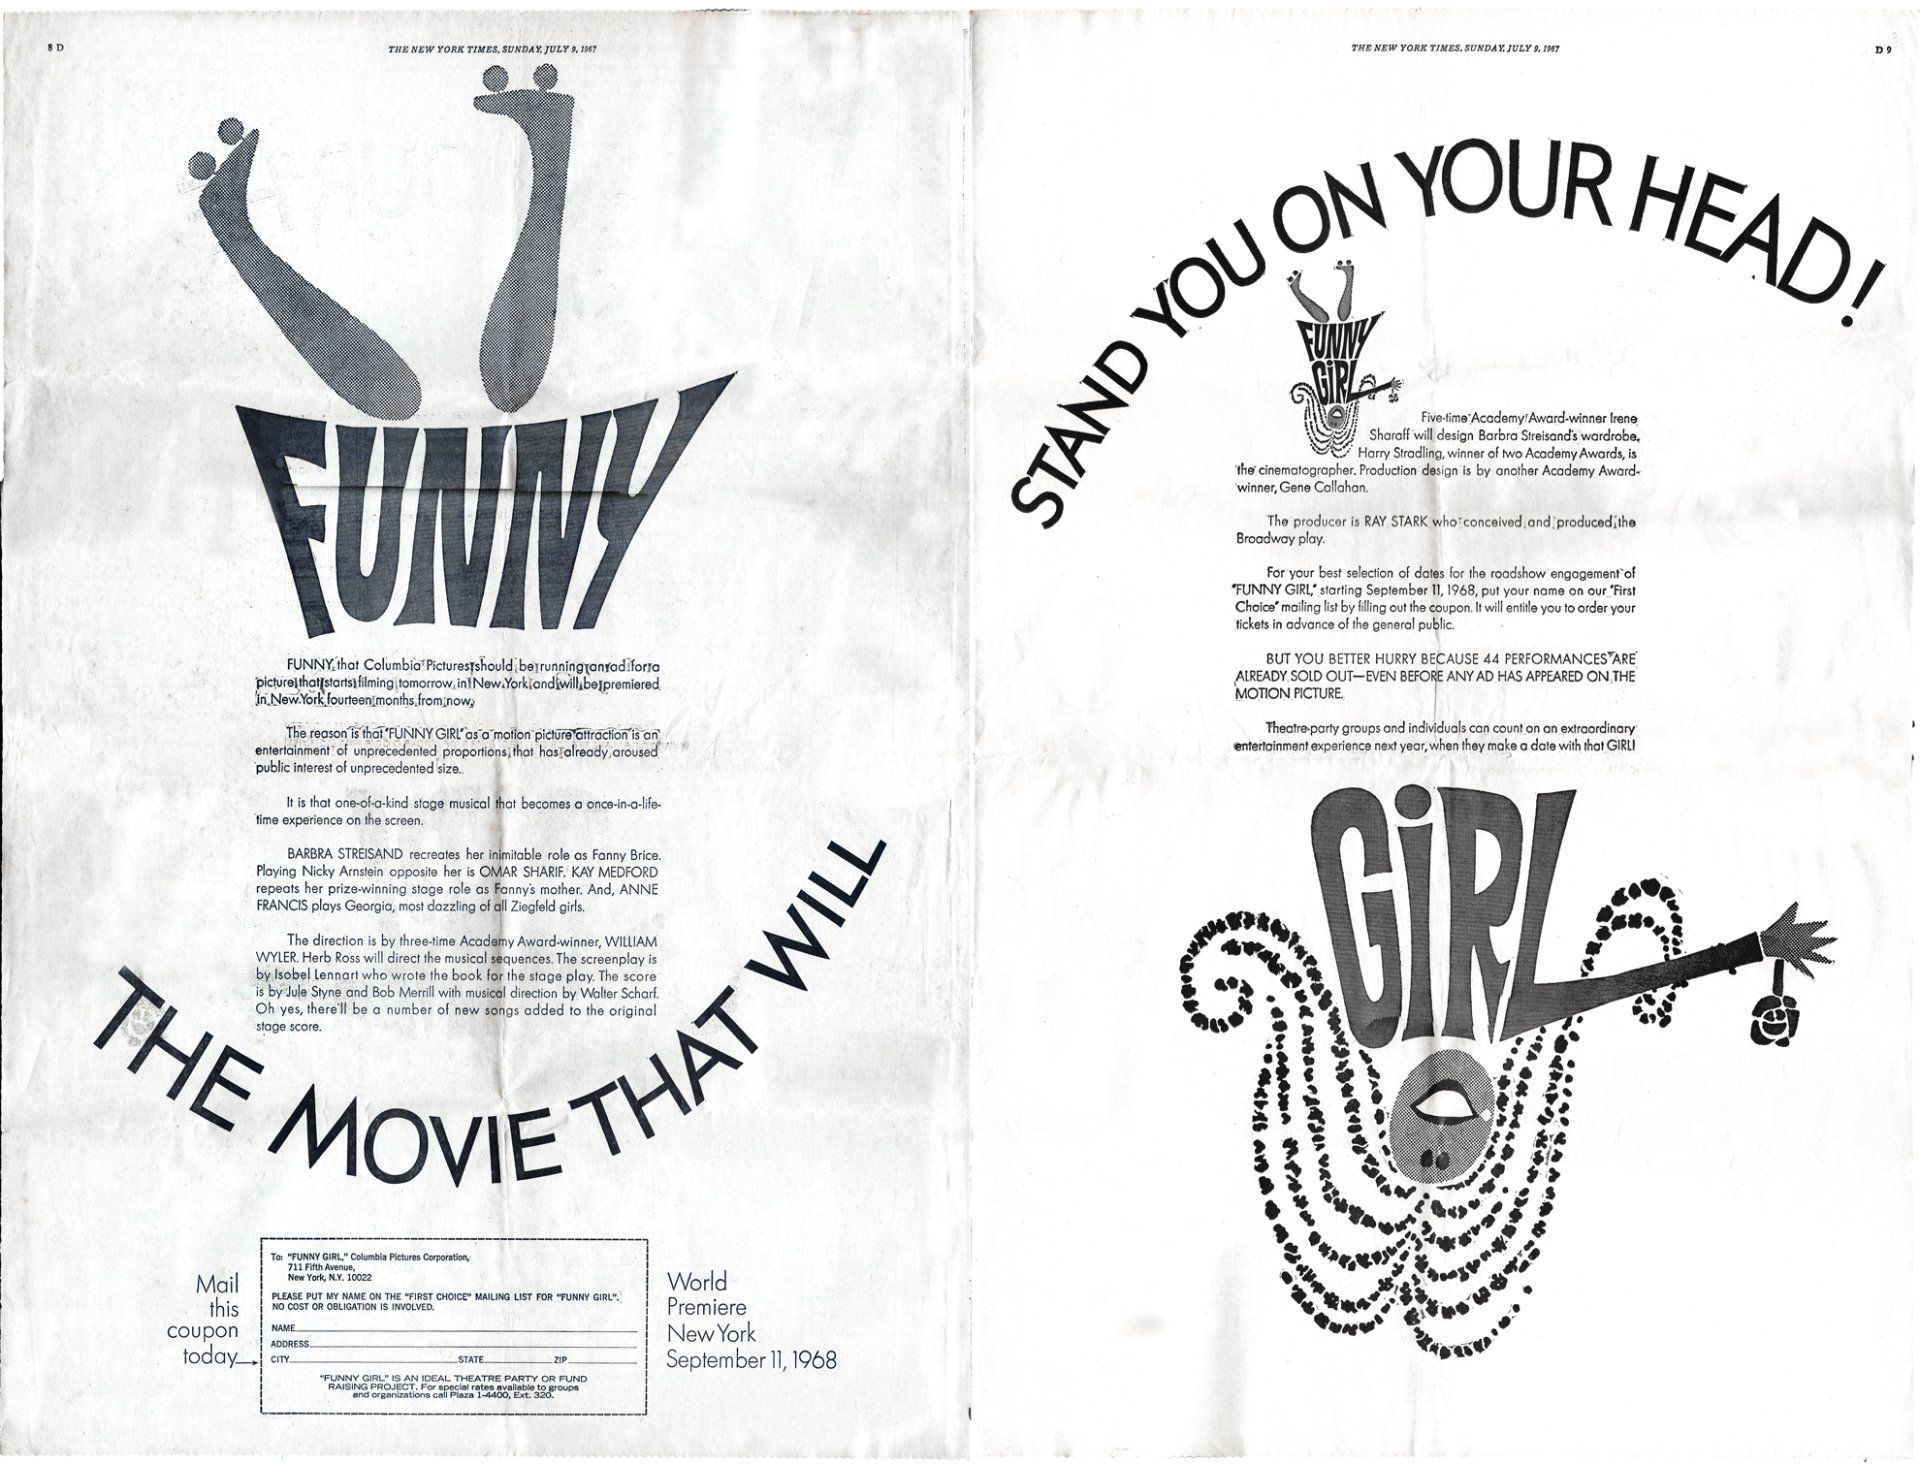 July 1967 double-ad for Funny Girl early ticket sales.